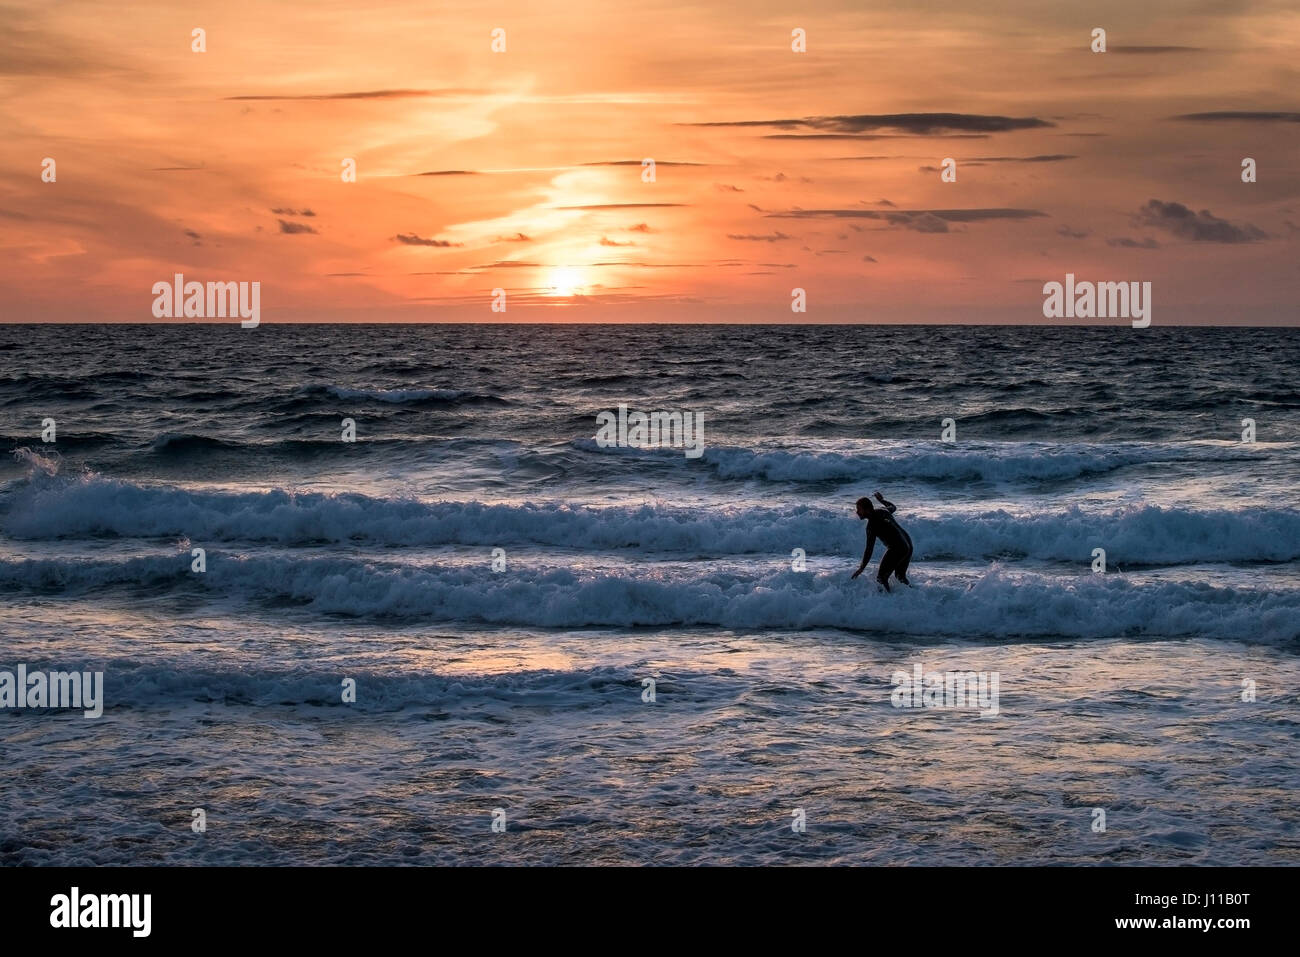 Surfing UK; Surfer; Sunset; Intense sunset; Evening; Fistral; Cornwall; Wave; Sea; Watersport; Physical activity; Skill; Leisure activity; Lifestyle;  Stock Photo